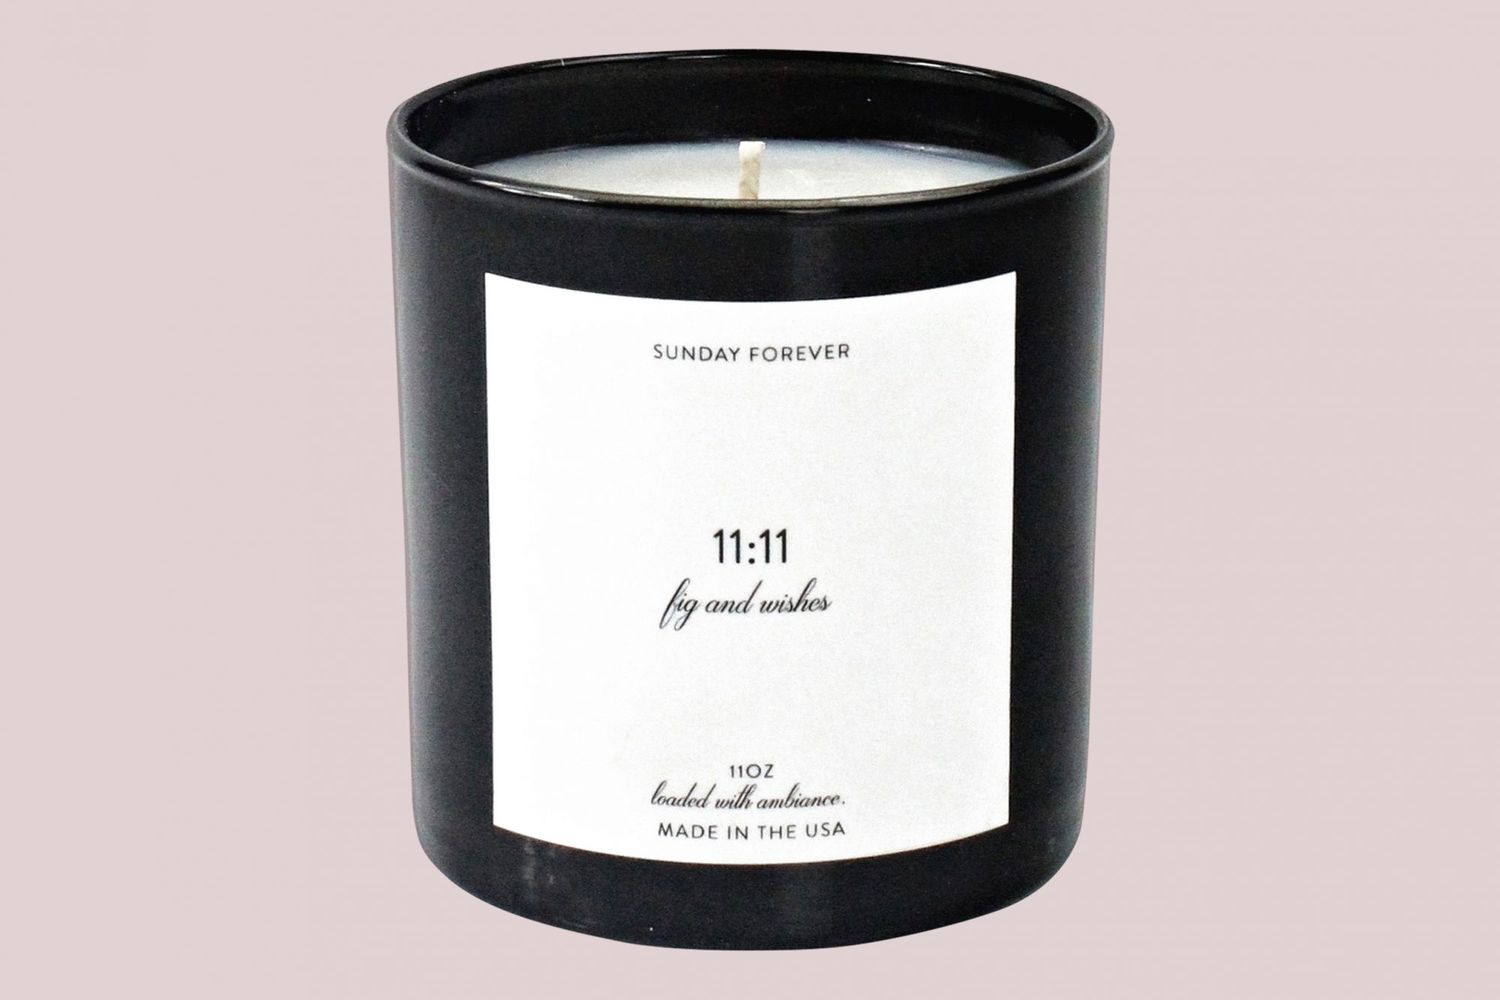 Sunday Forever Fig and Wishes candle